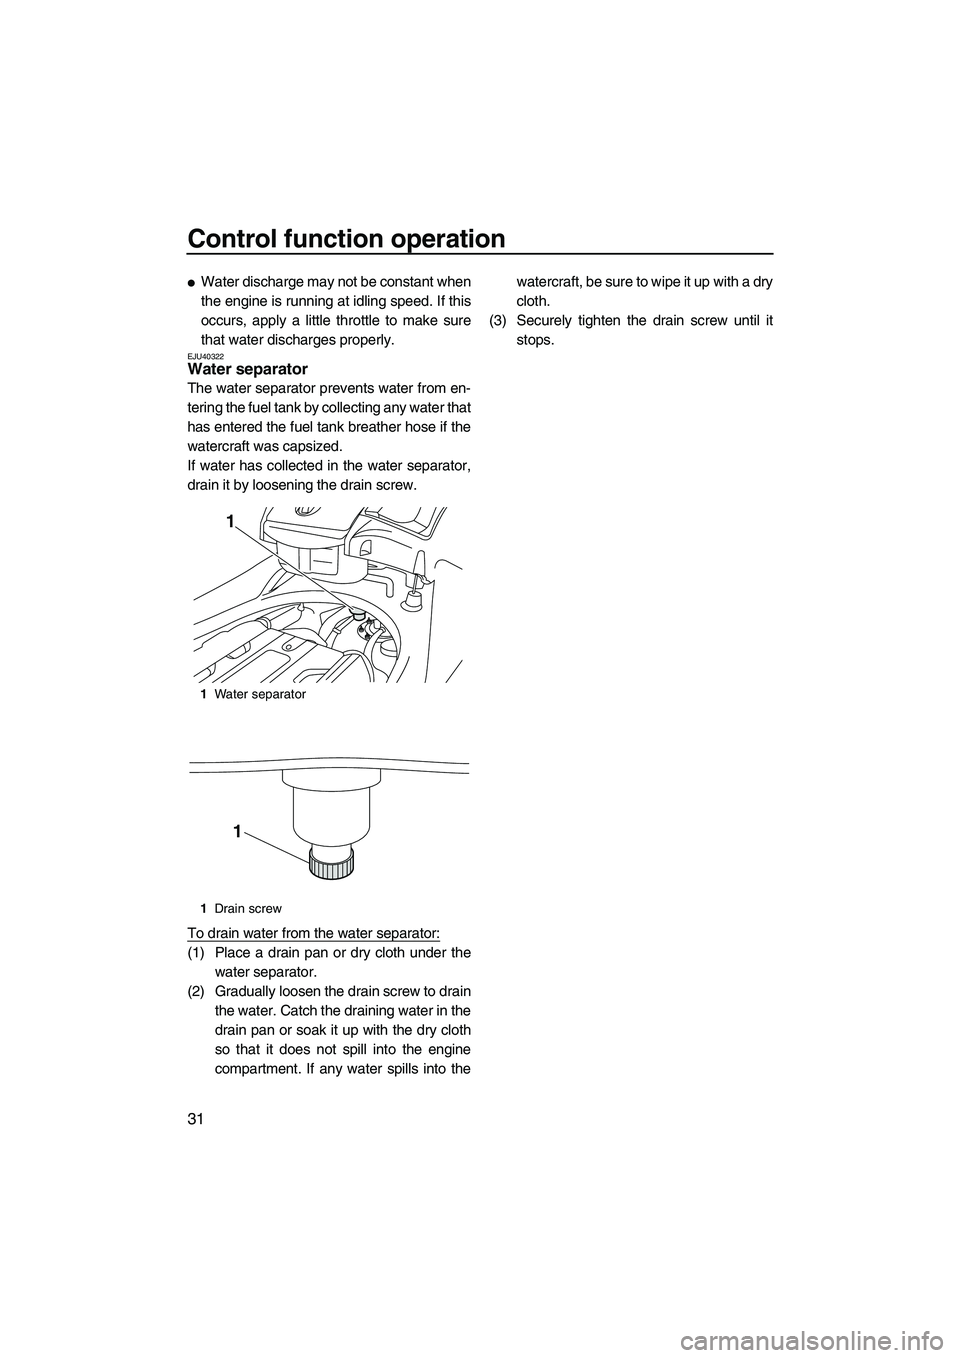 YAMAHA FX SHO 2010  Owners Manual Control function operation
31
Water discharge may not be constant when
the engine is running at idling speed. If this
occurs, apply a little throttle to make sure
that water discharges properly.
EJU4